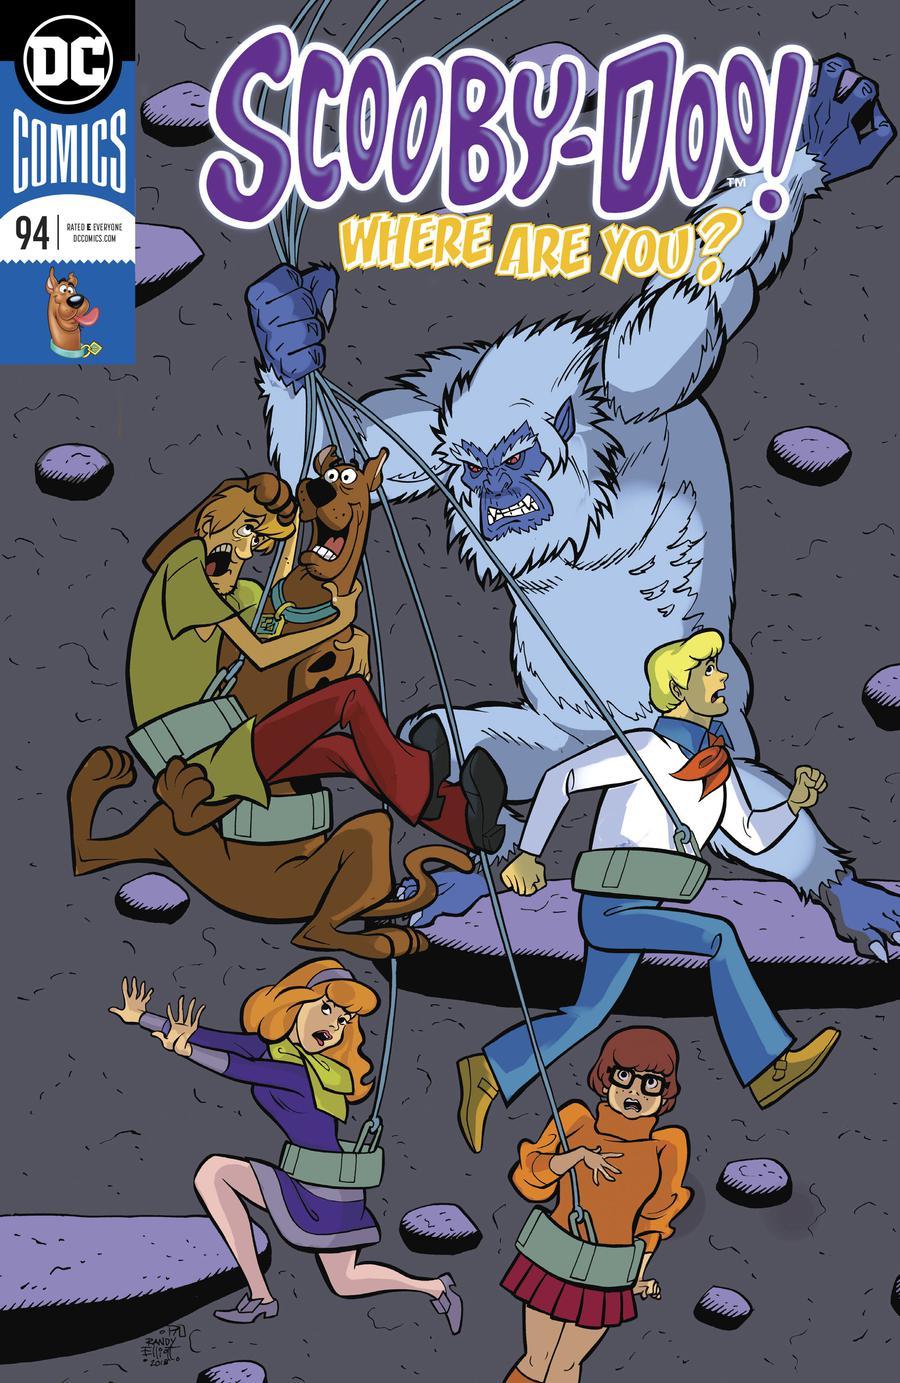 Scooby-Doo Where Are You Vol. 1 #94